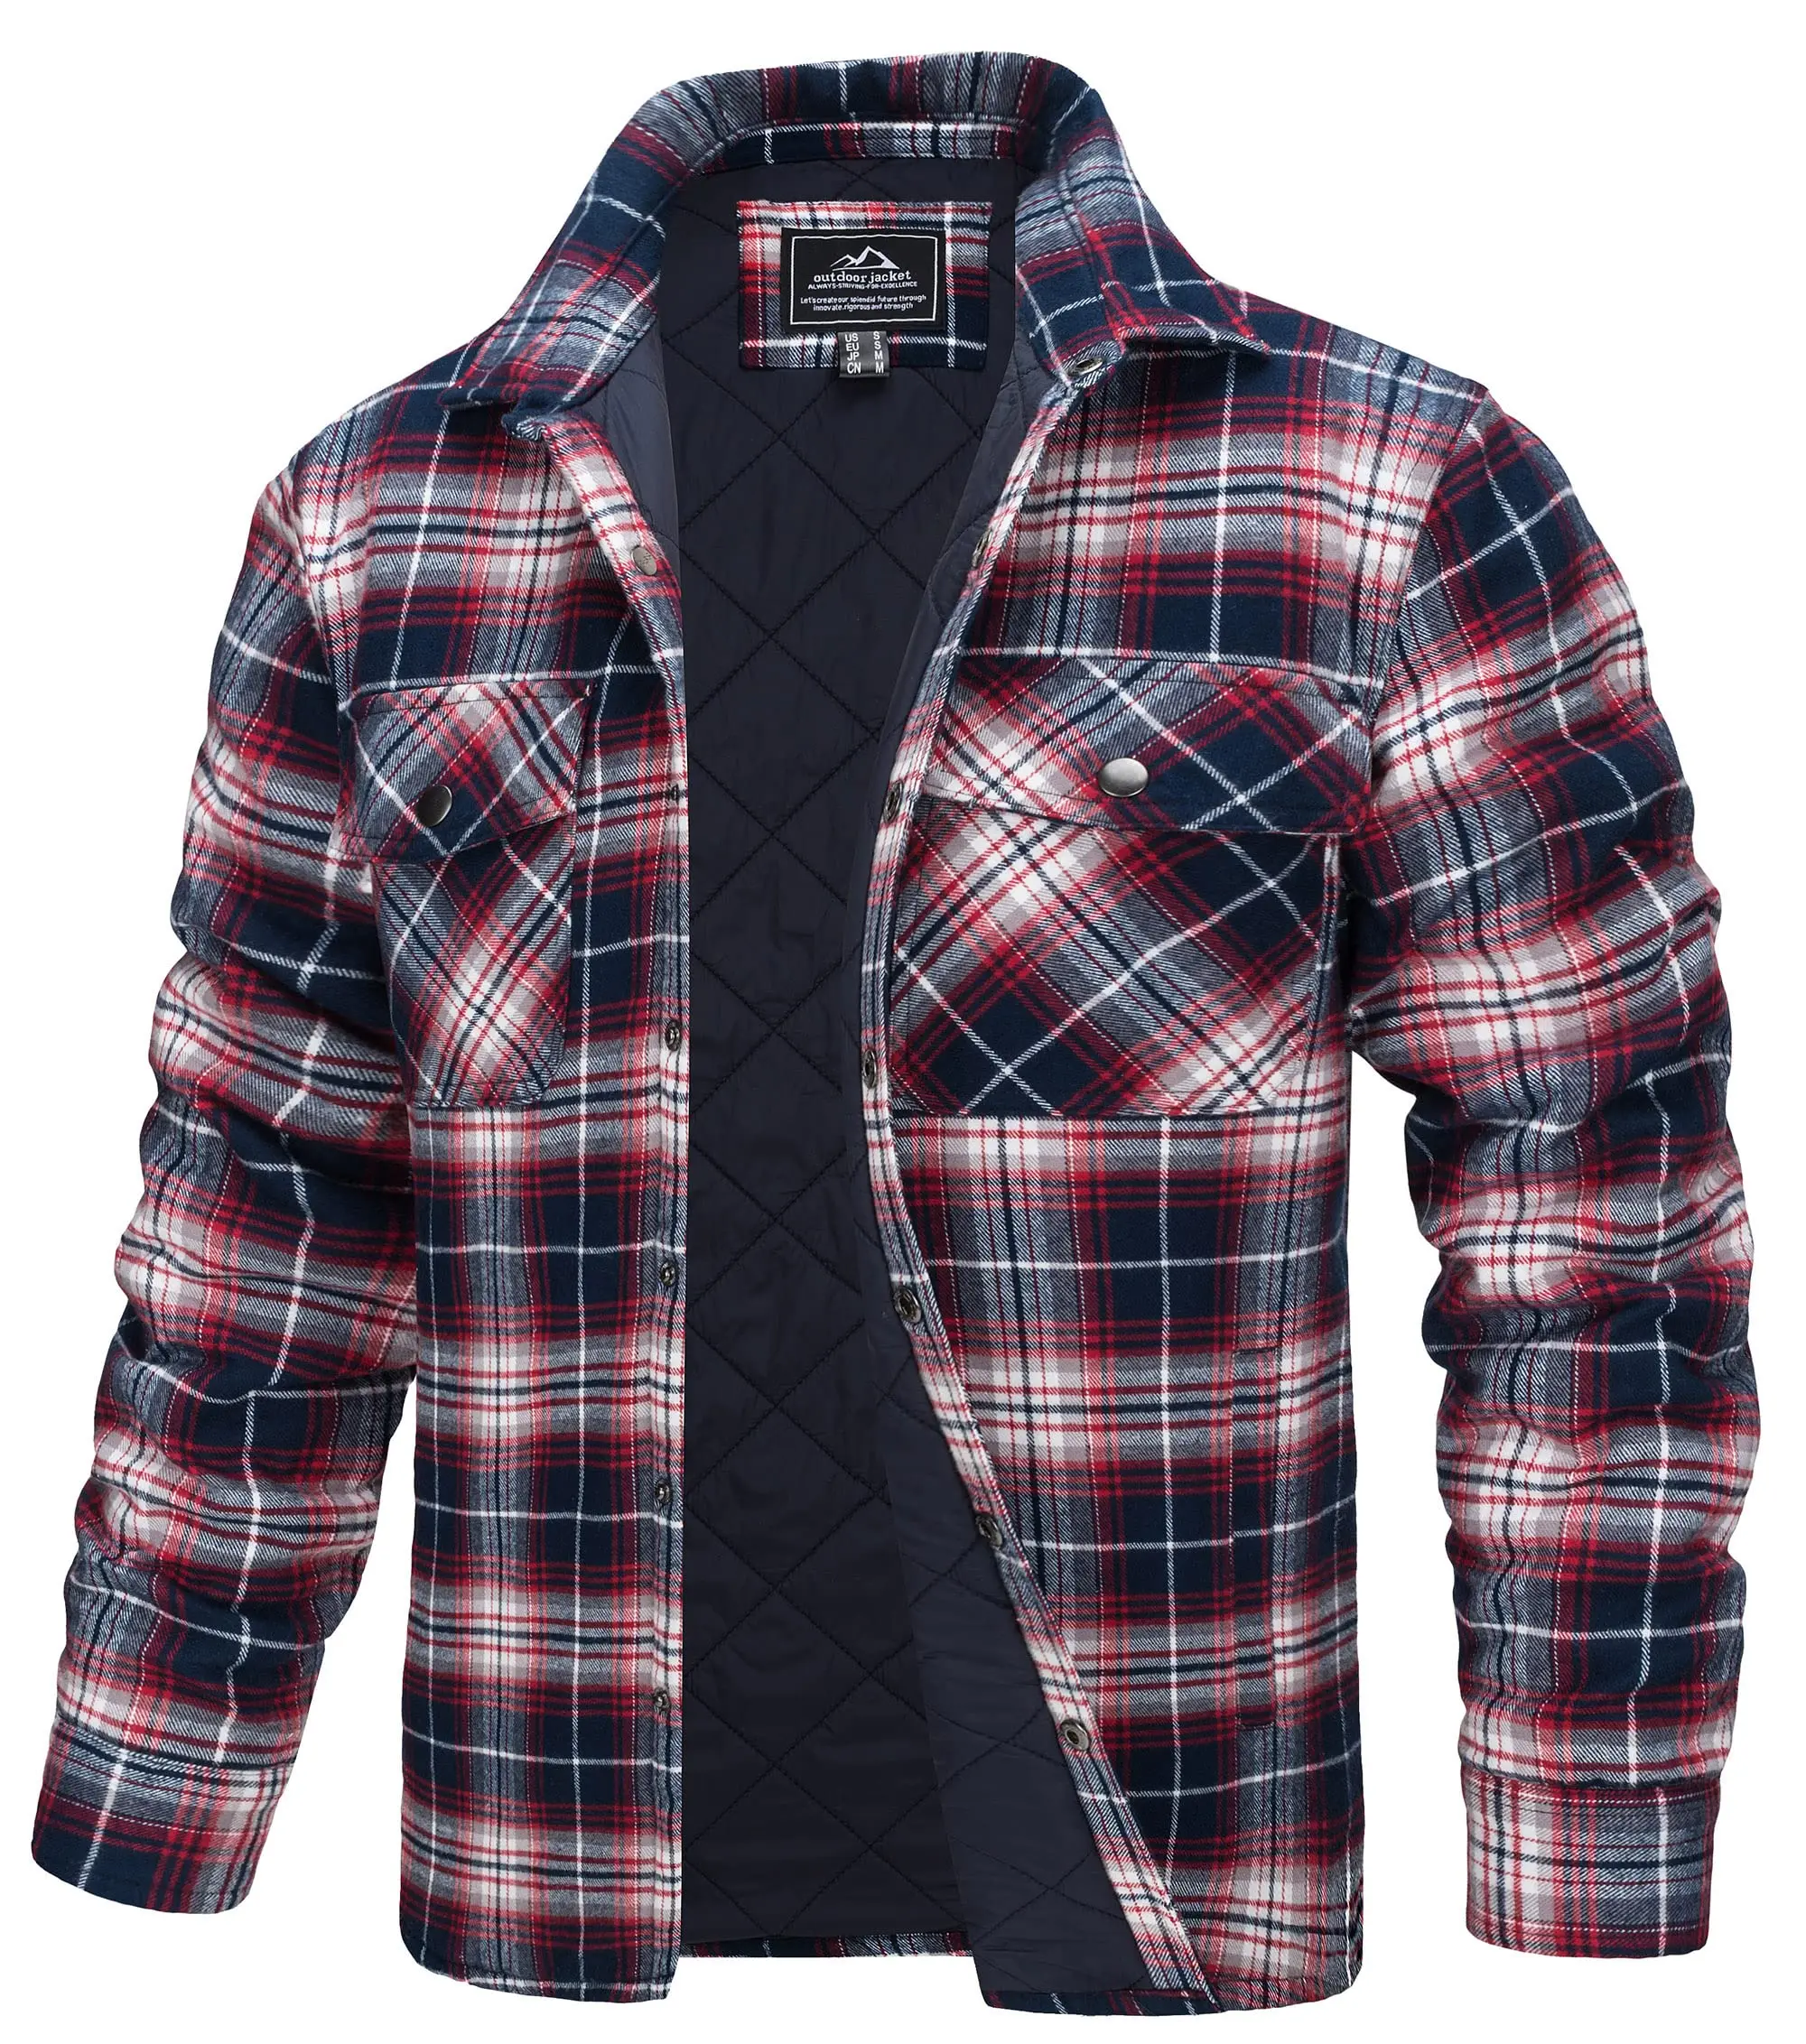 Winter Fashion 2022 Casual Flannel Shirt Jacket Multi-Pockets Outwear Mens Long Sleeve Plaid Cotton Lined Jackets Hiking Coats mens plaid patchwork pocket flannel shirt l gray